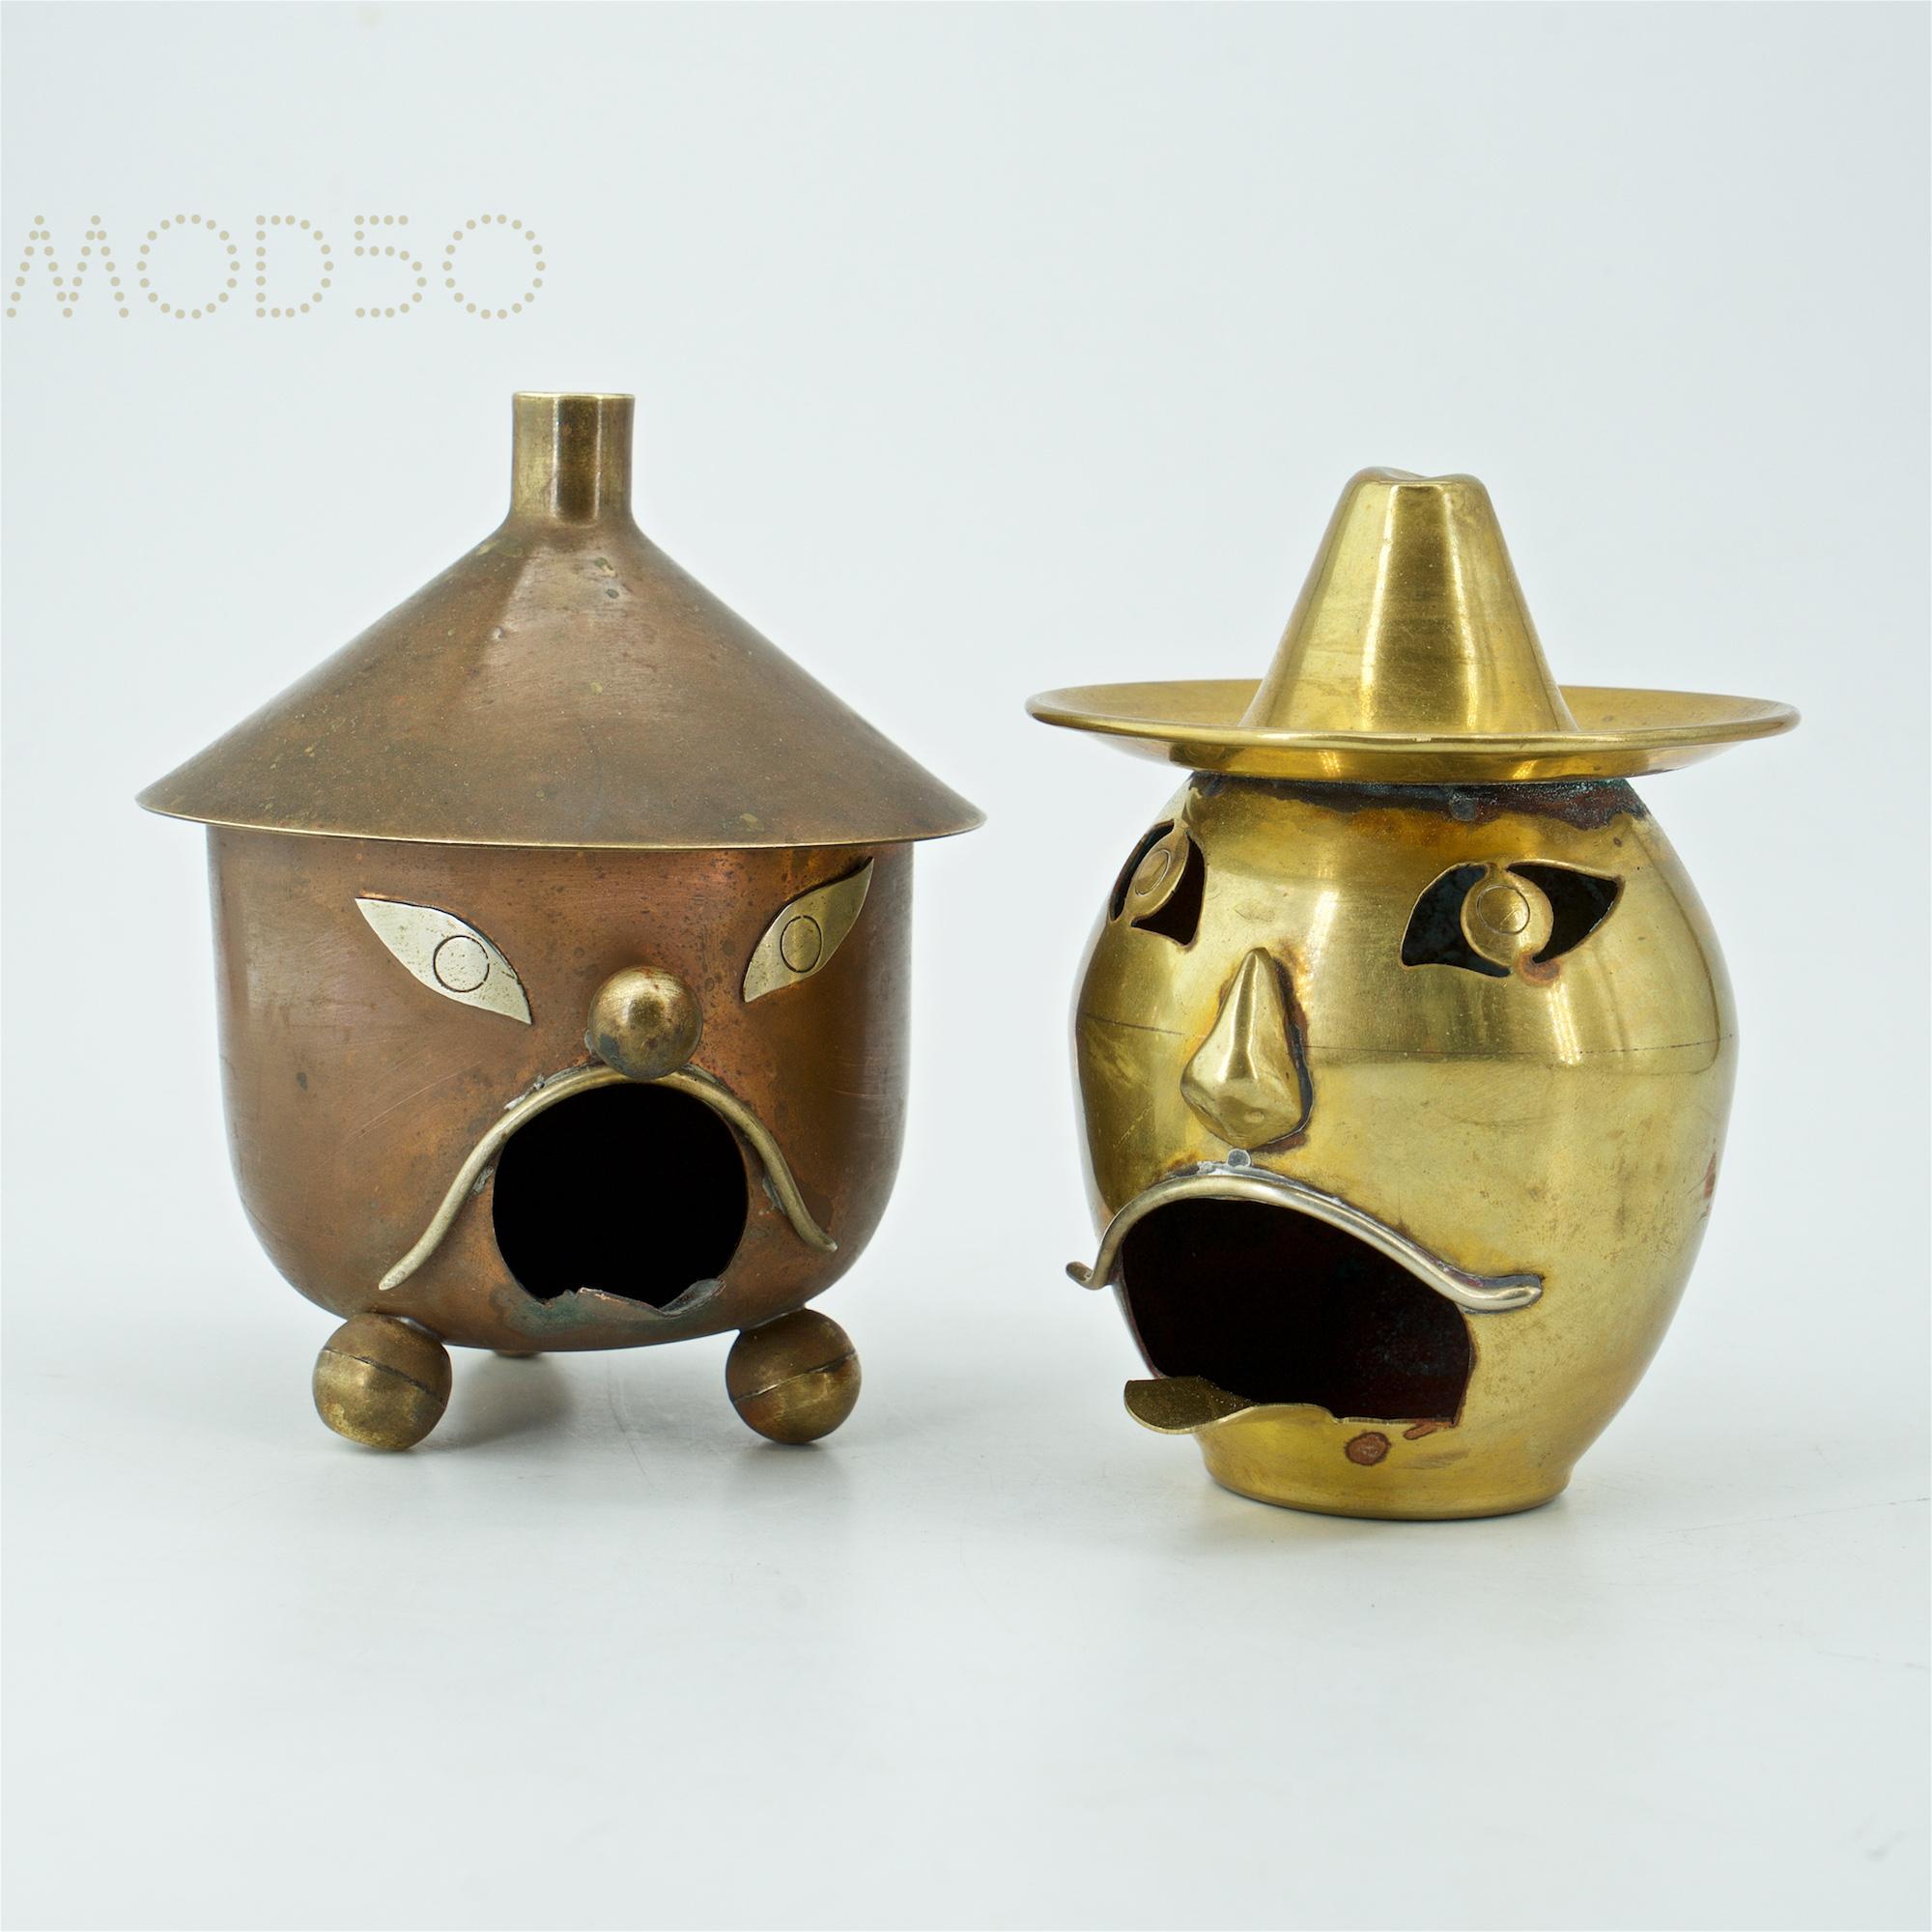 Pair of Banditos lantern / smokestack ashtrays. Many new uses, wonderful small objects. Relics from beyond the border. The stout copper one has a shadow of a label and is Dm 3.75 x H 4 in. The brass one, and is stamped, hecho en mexico, and is Dm